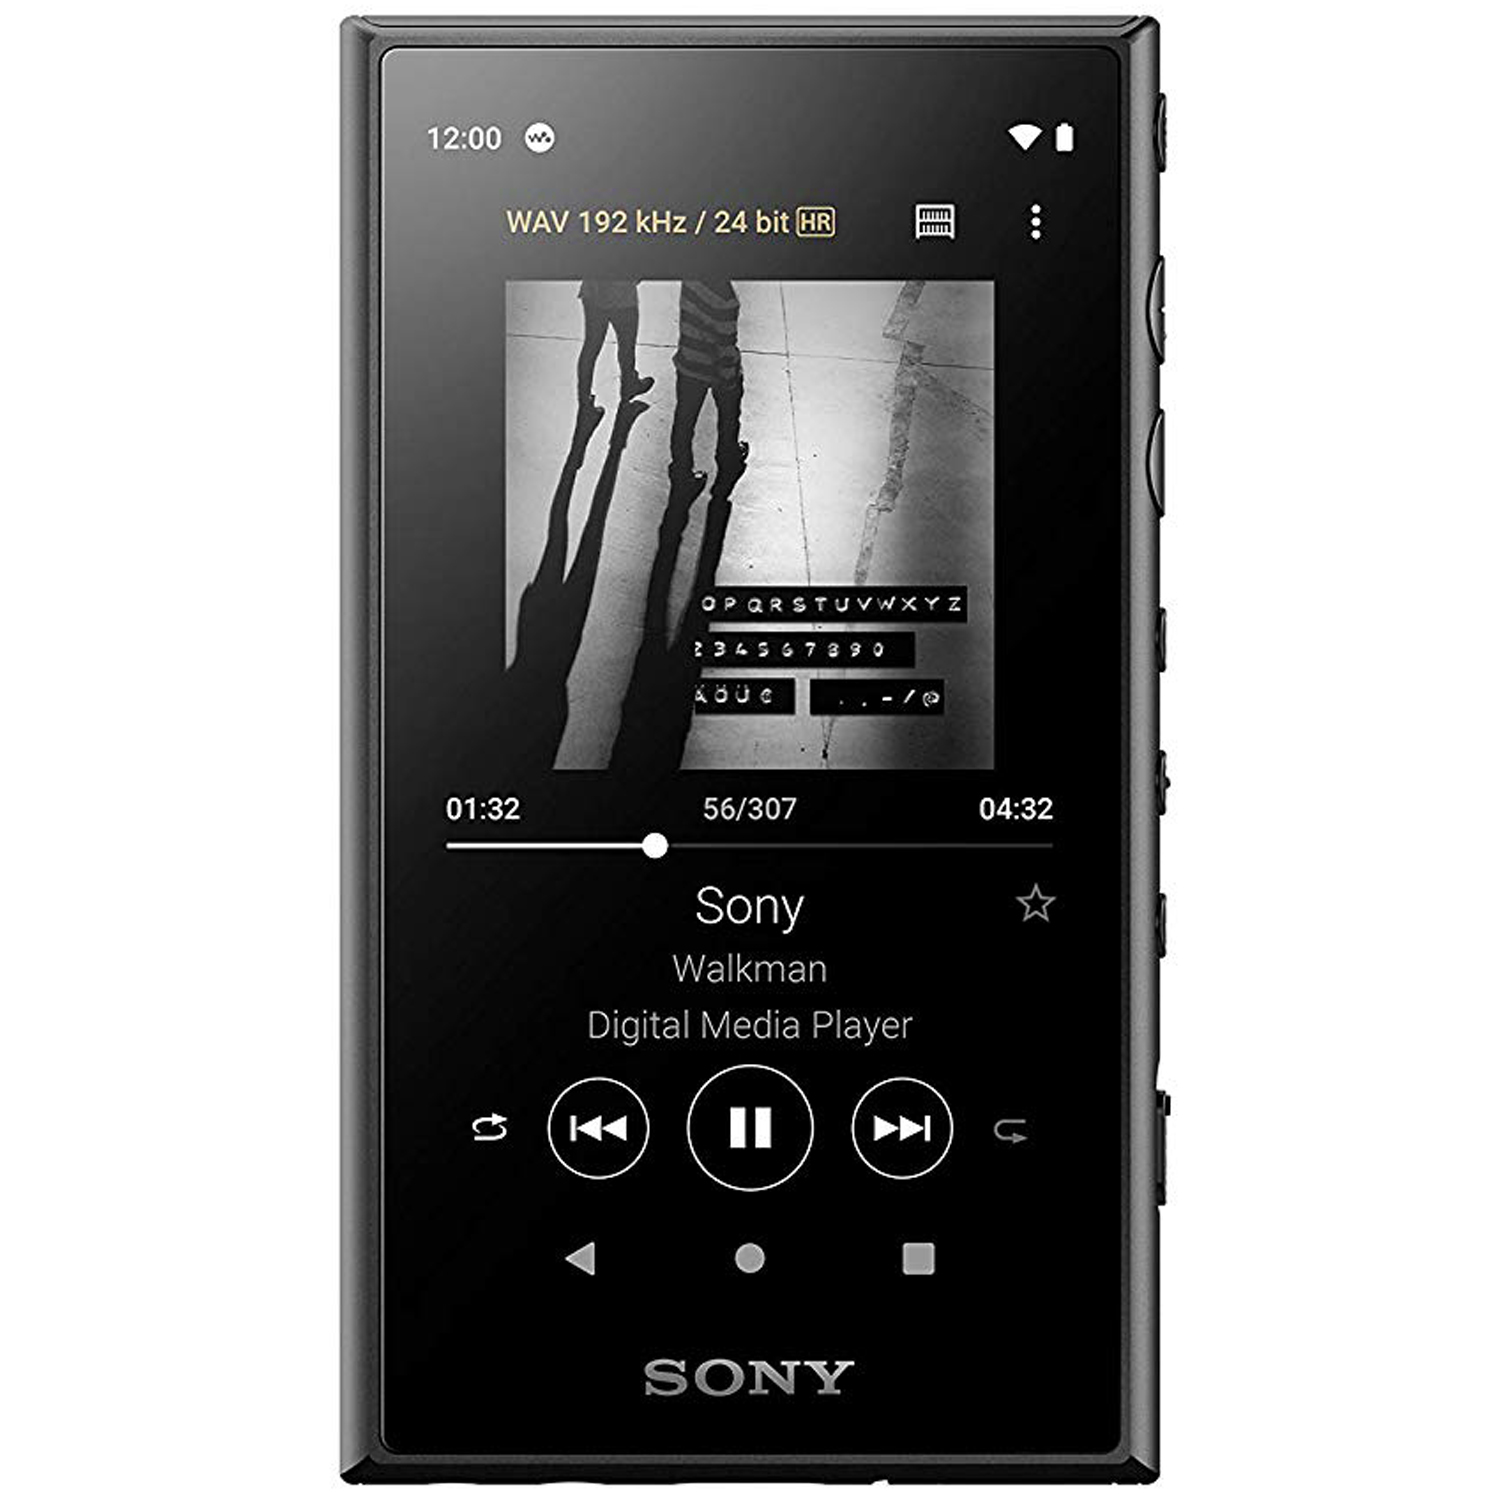 mp3 player free download